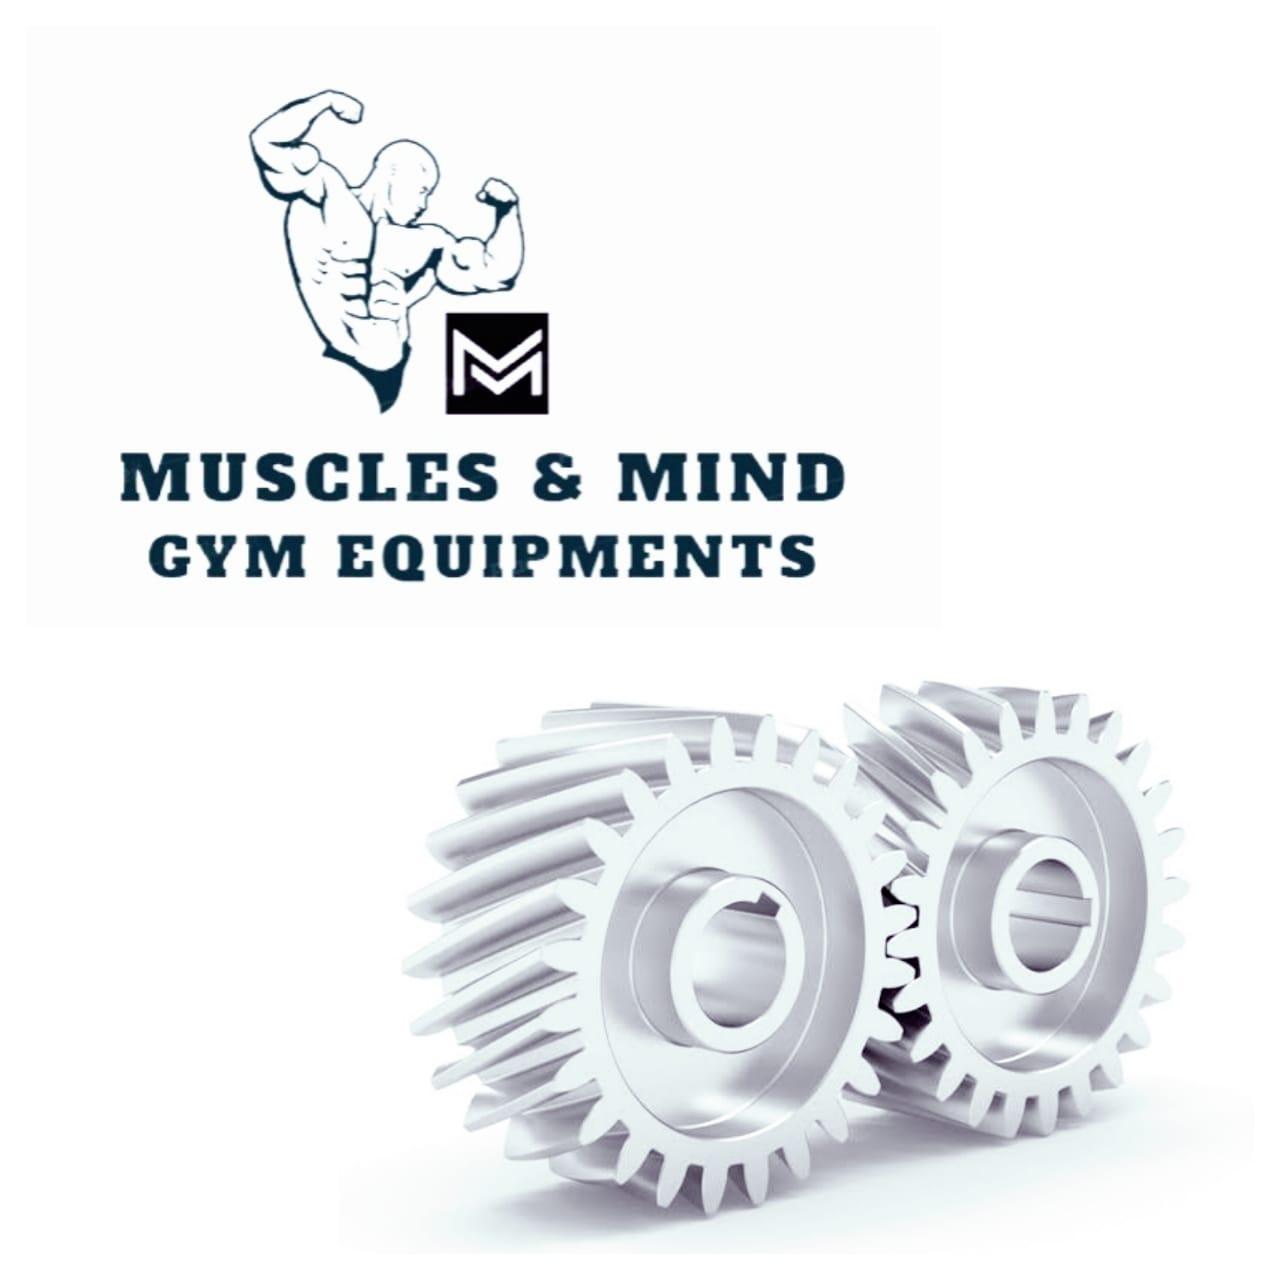 MUSCLES & MIND GYM EQUIPMENT